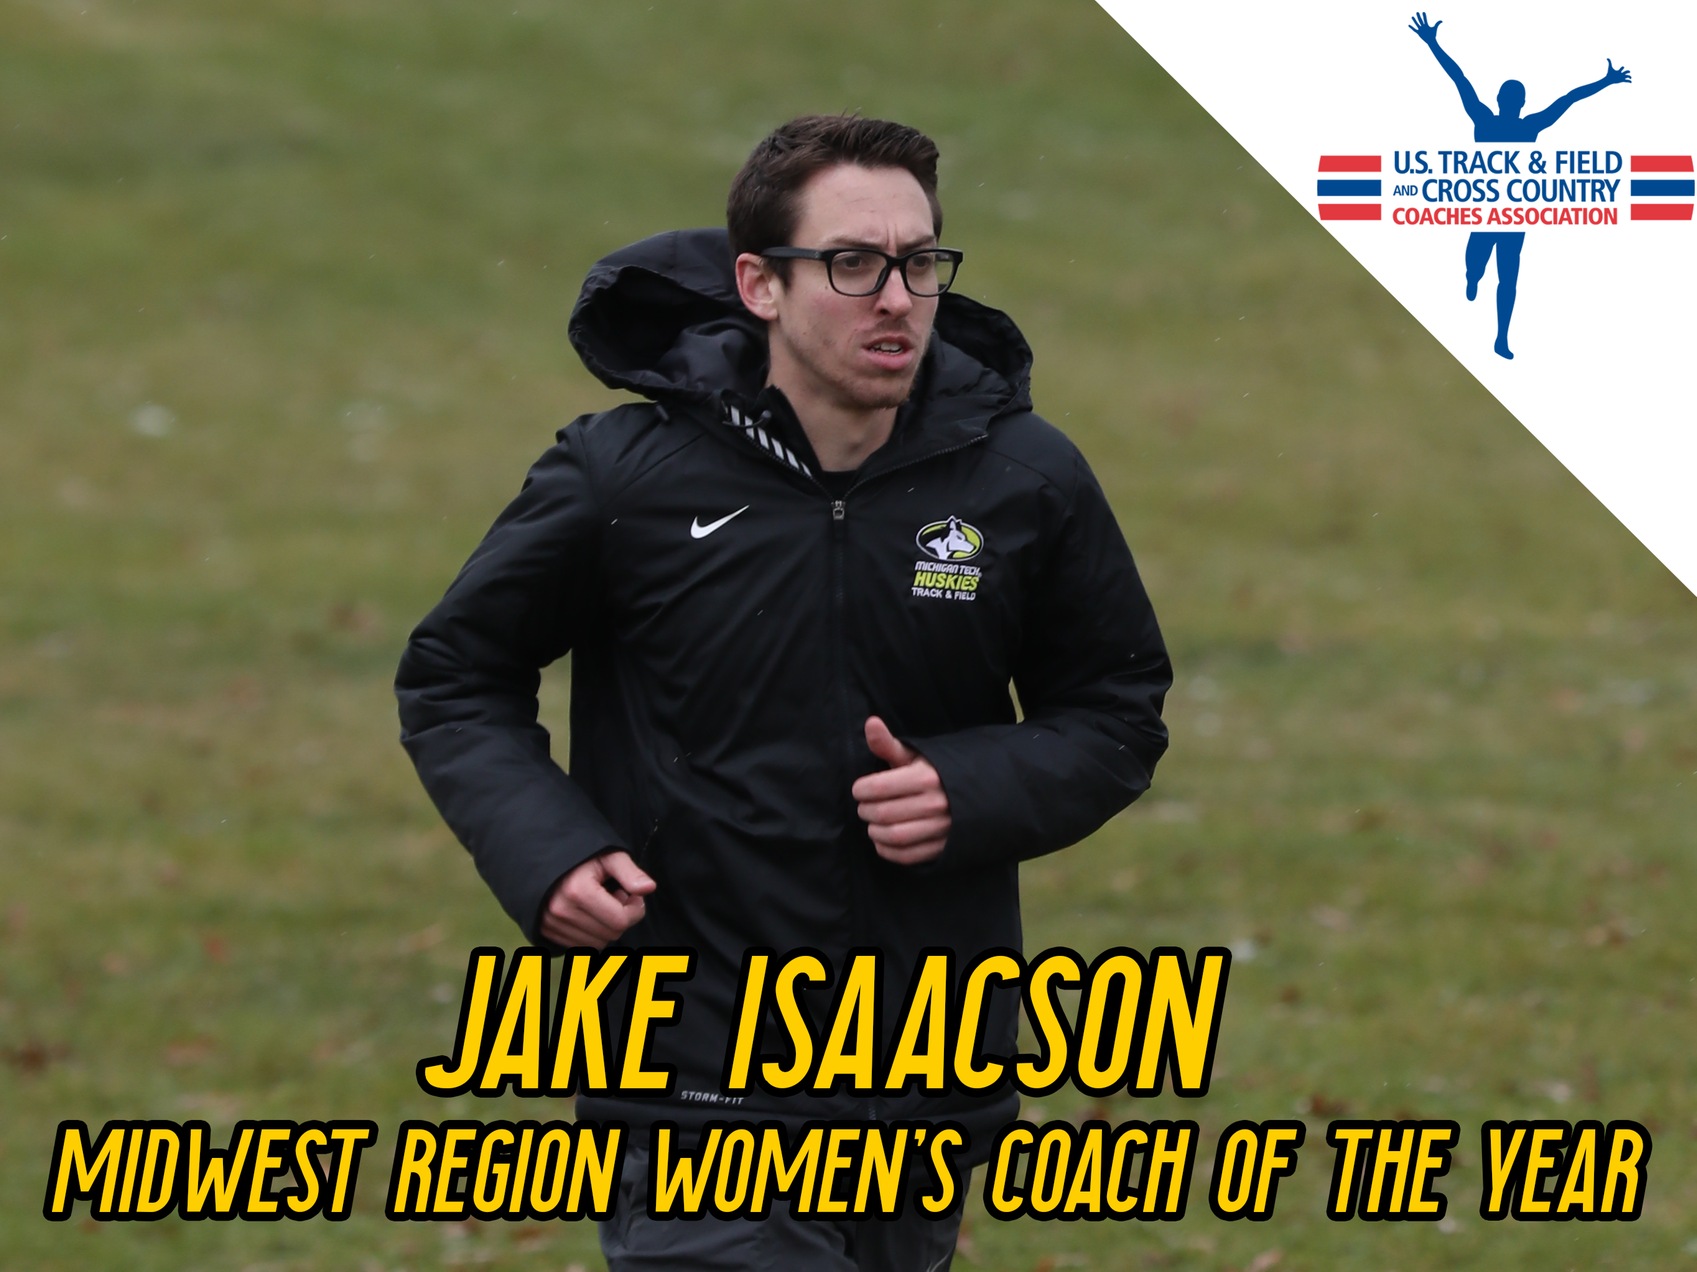 Jake Isaacson Named USTFCCCA Midwest Region Women's Coach of the Year